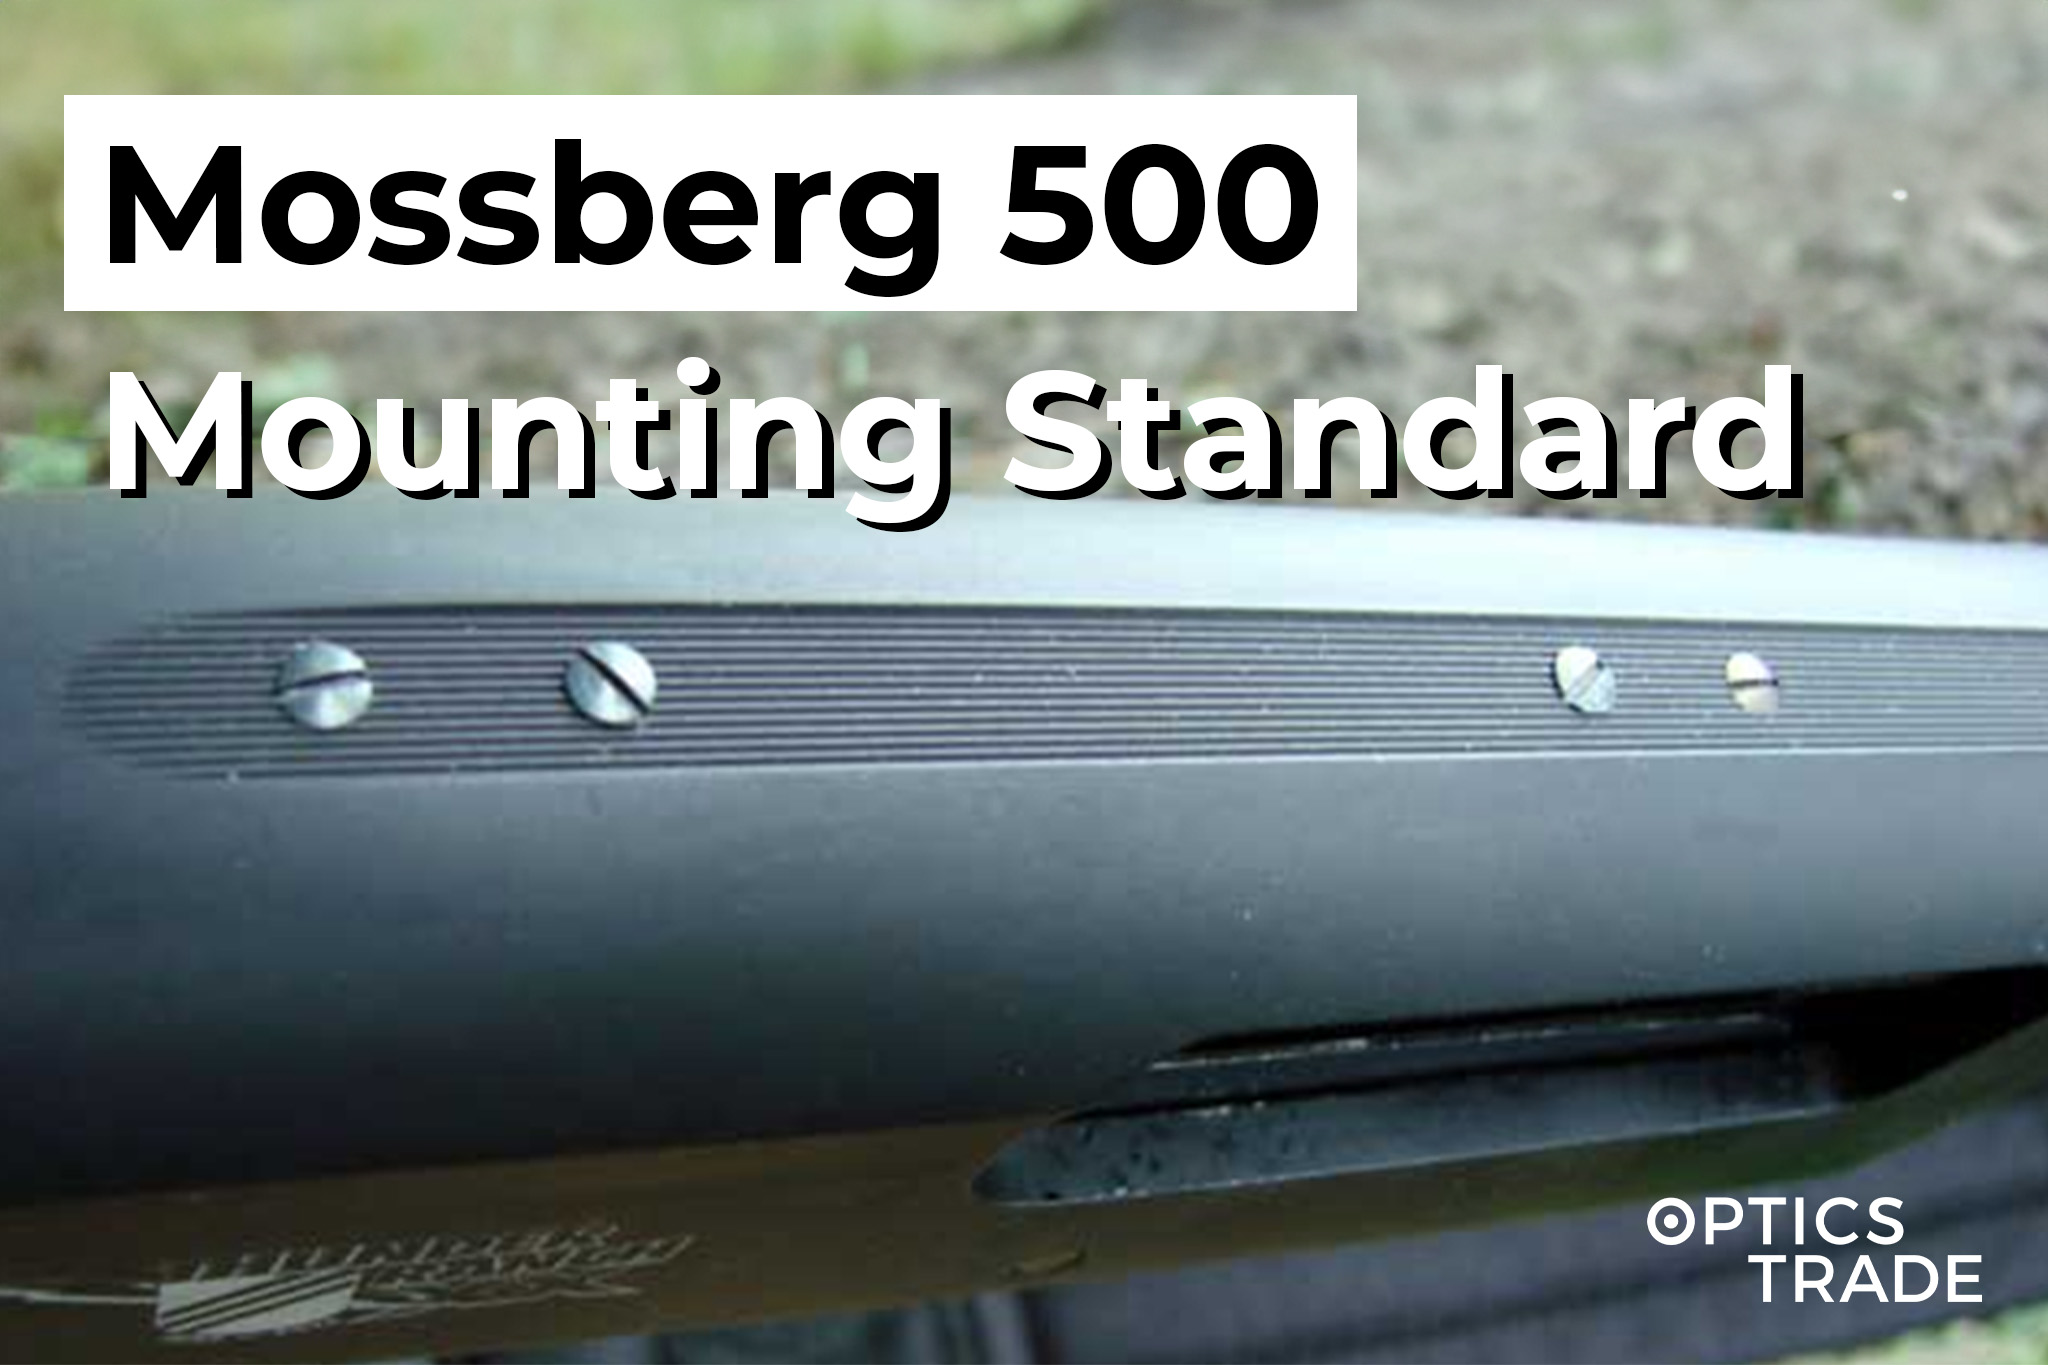 Rifles With Mossberg 500 Scope Mounting Surface